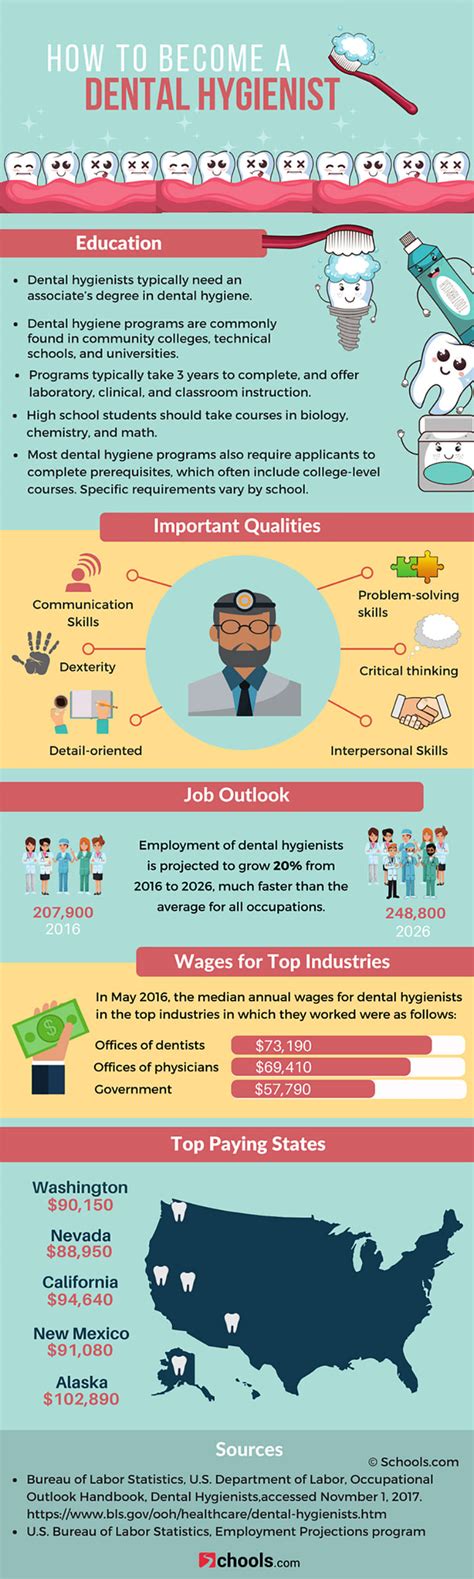 How To Become A Dental Hygienist Infographic Visualistan